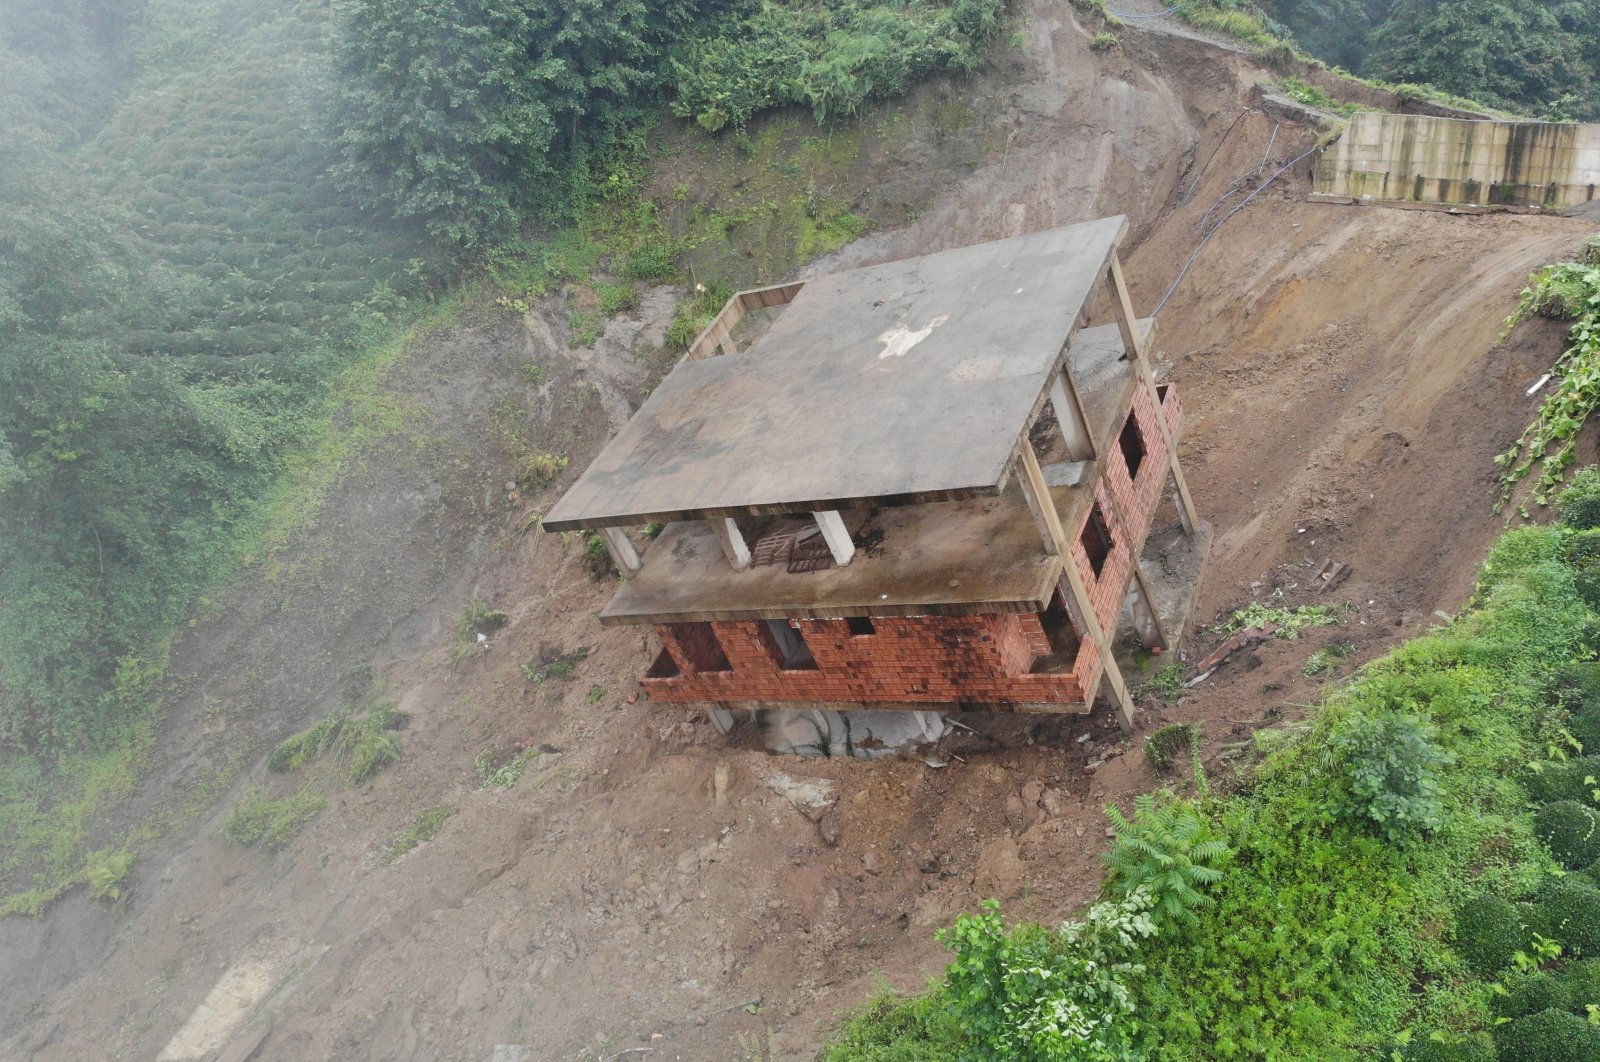 A view of a building that slid down the slope after a landslide, in Rize, northern Turkey, Aug. 14, 2021. (IHA PHOTO)